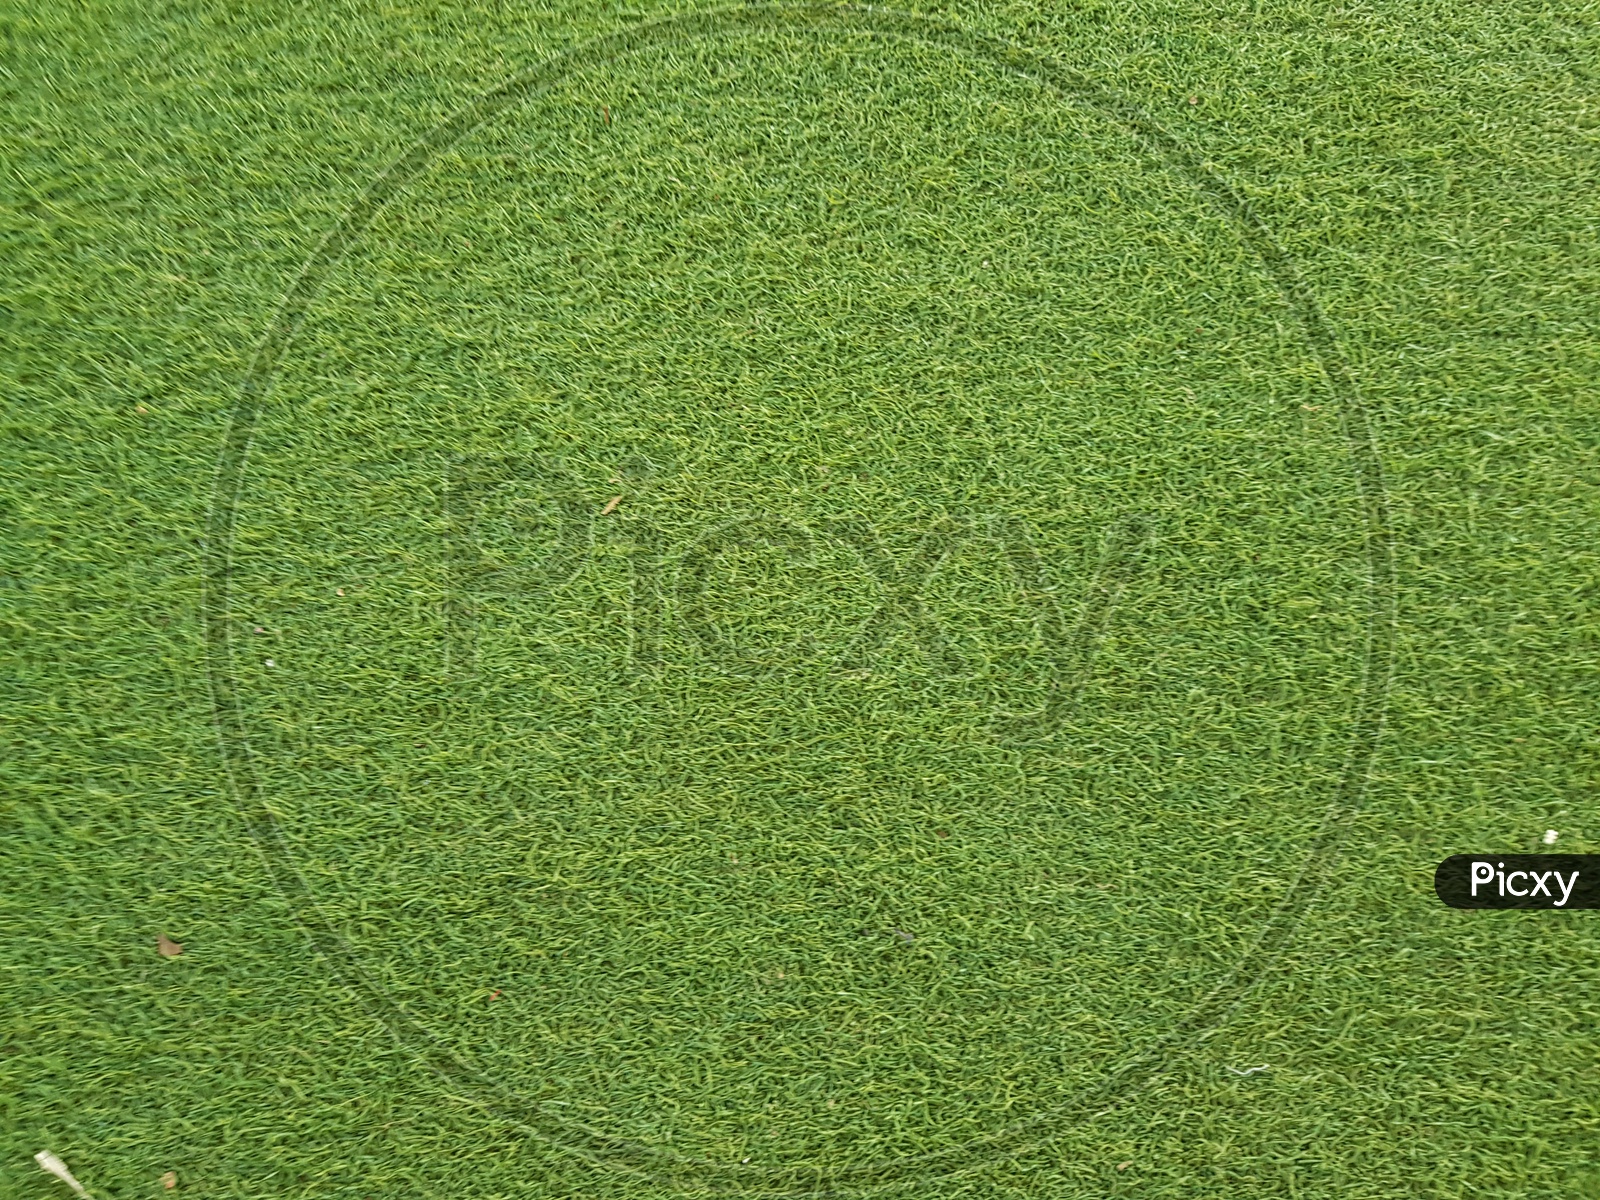 Green Lawn Grass With Texture Forming a Background